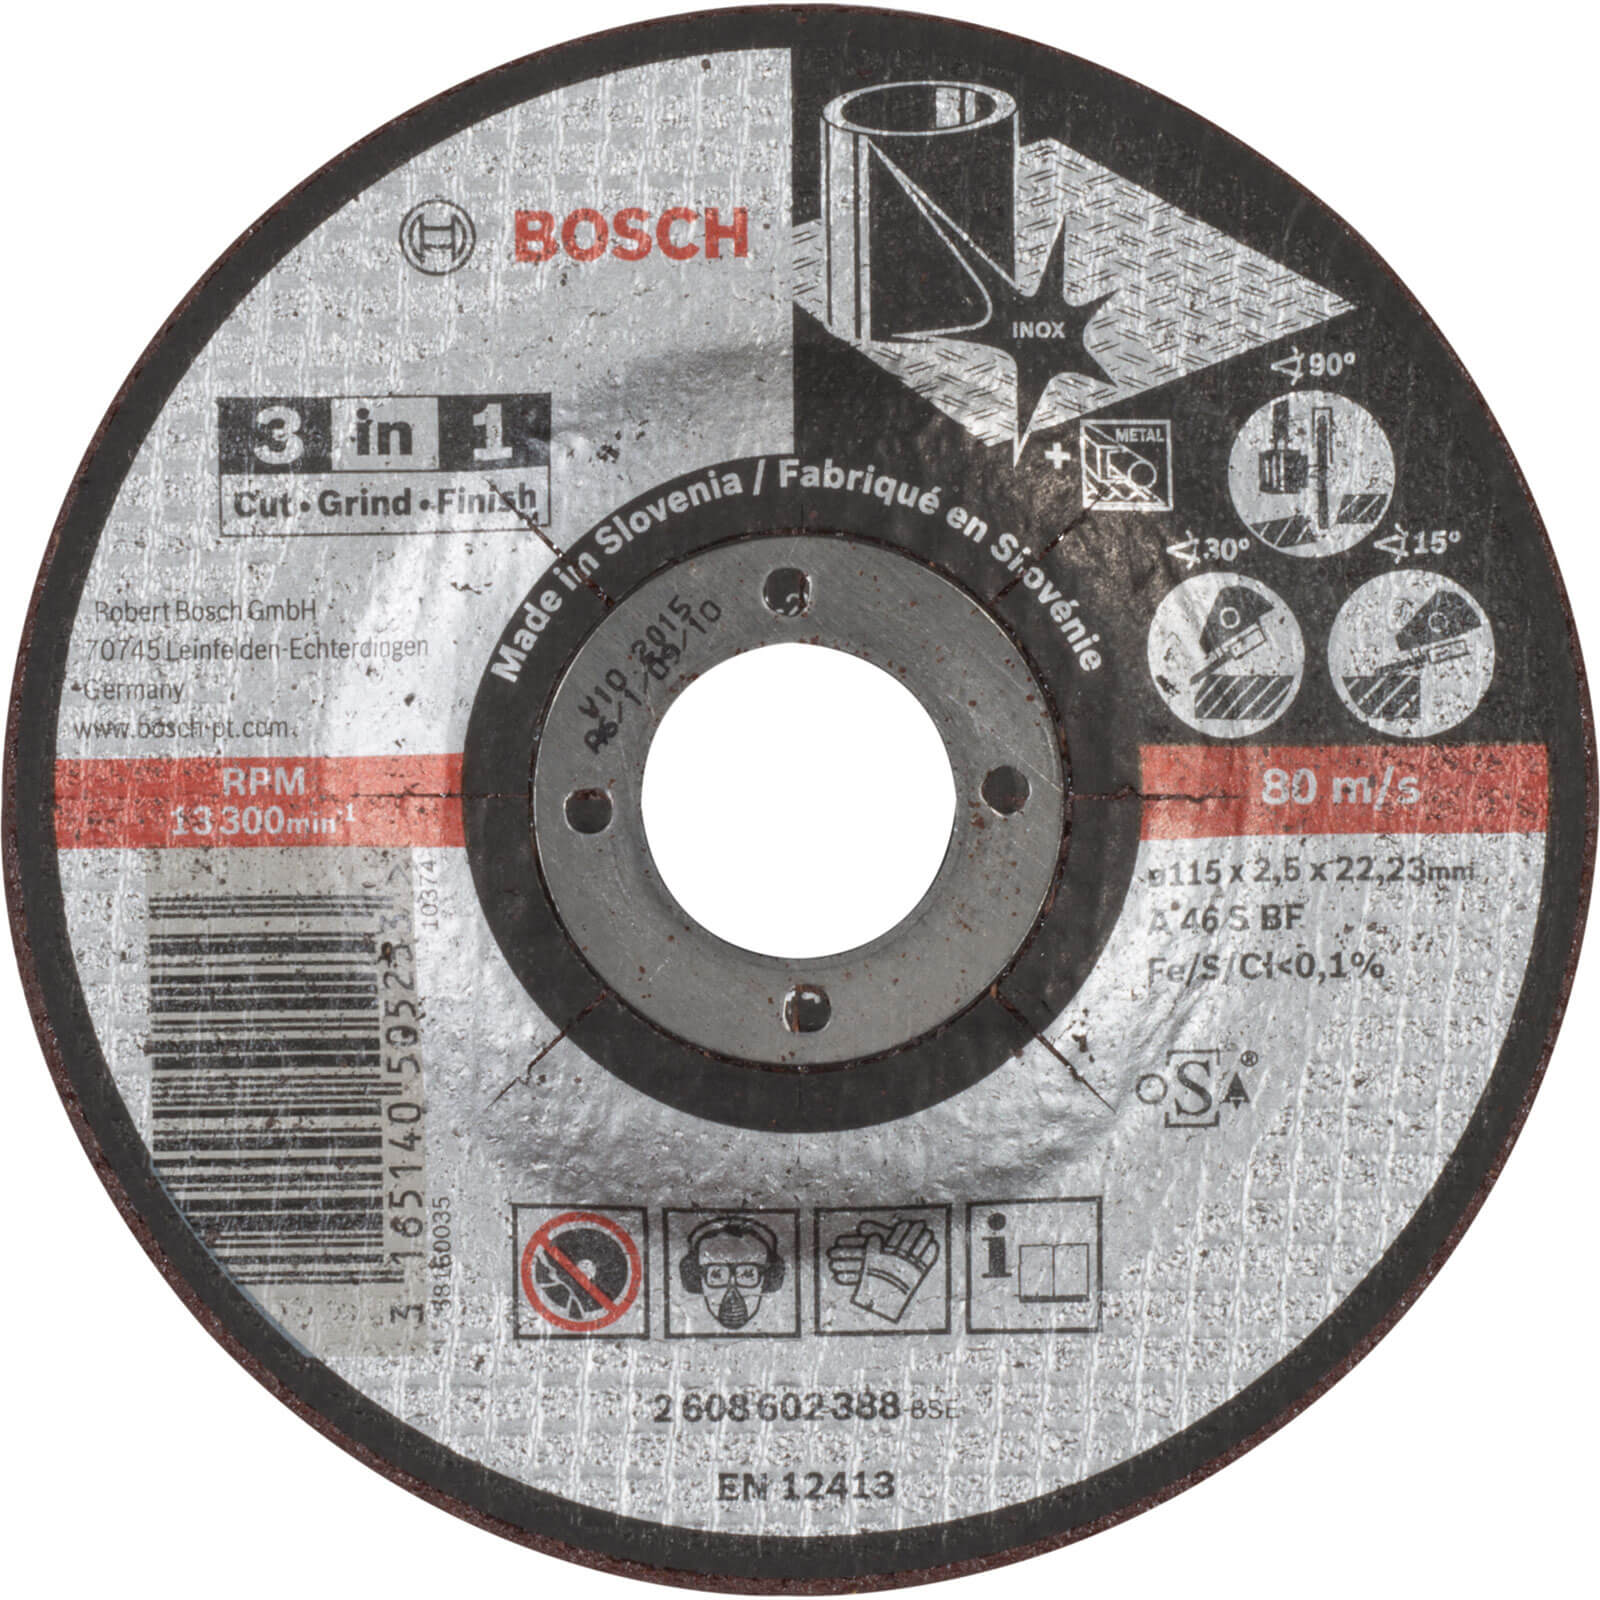 Photo of Bosch Depressed Centre 3 In 1 Cutting Grinding Finishing Disc 115mm 2.5mm 22mm